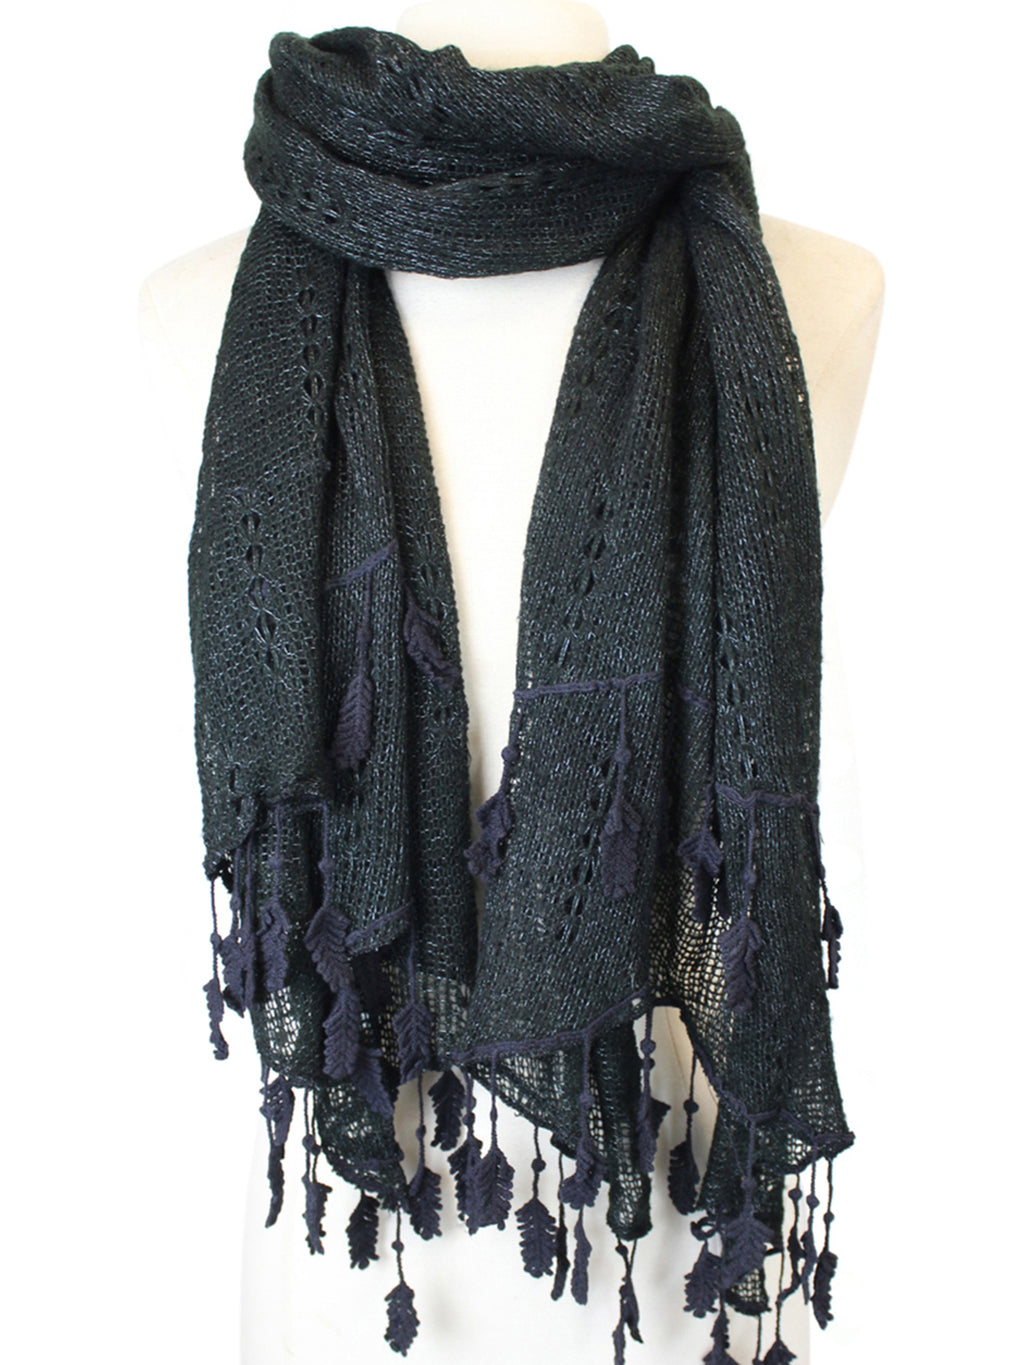 Long Two-Tone Knit Unisex Winter Scarf